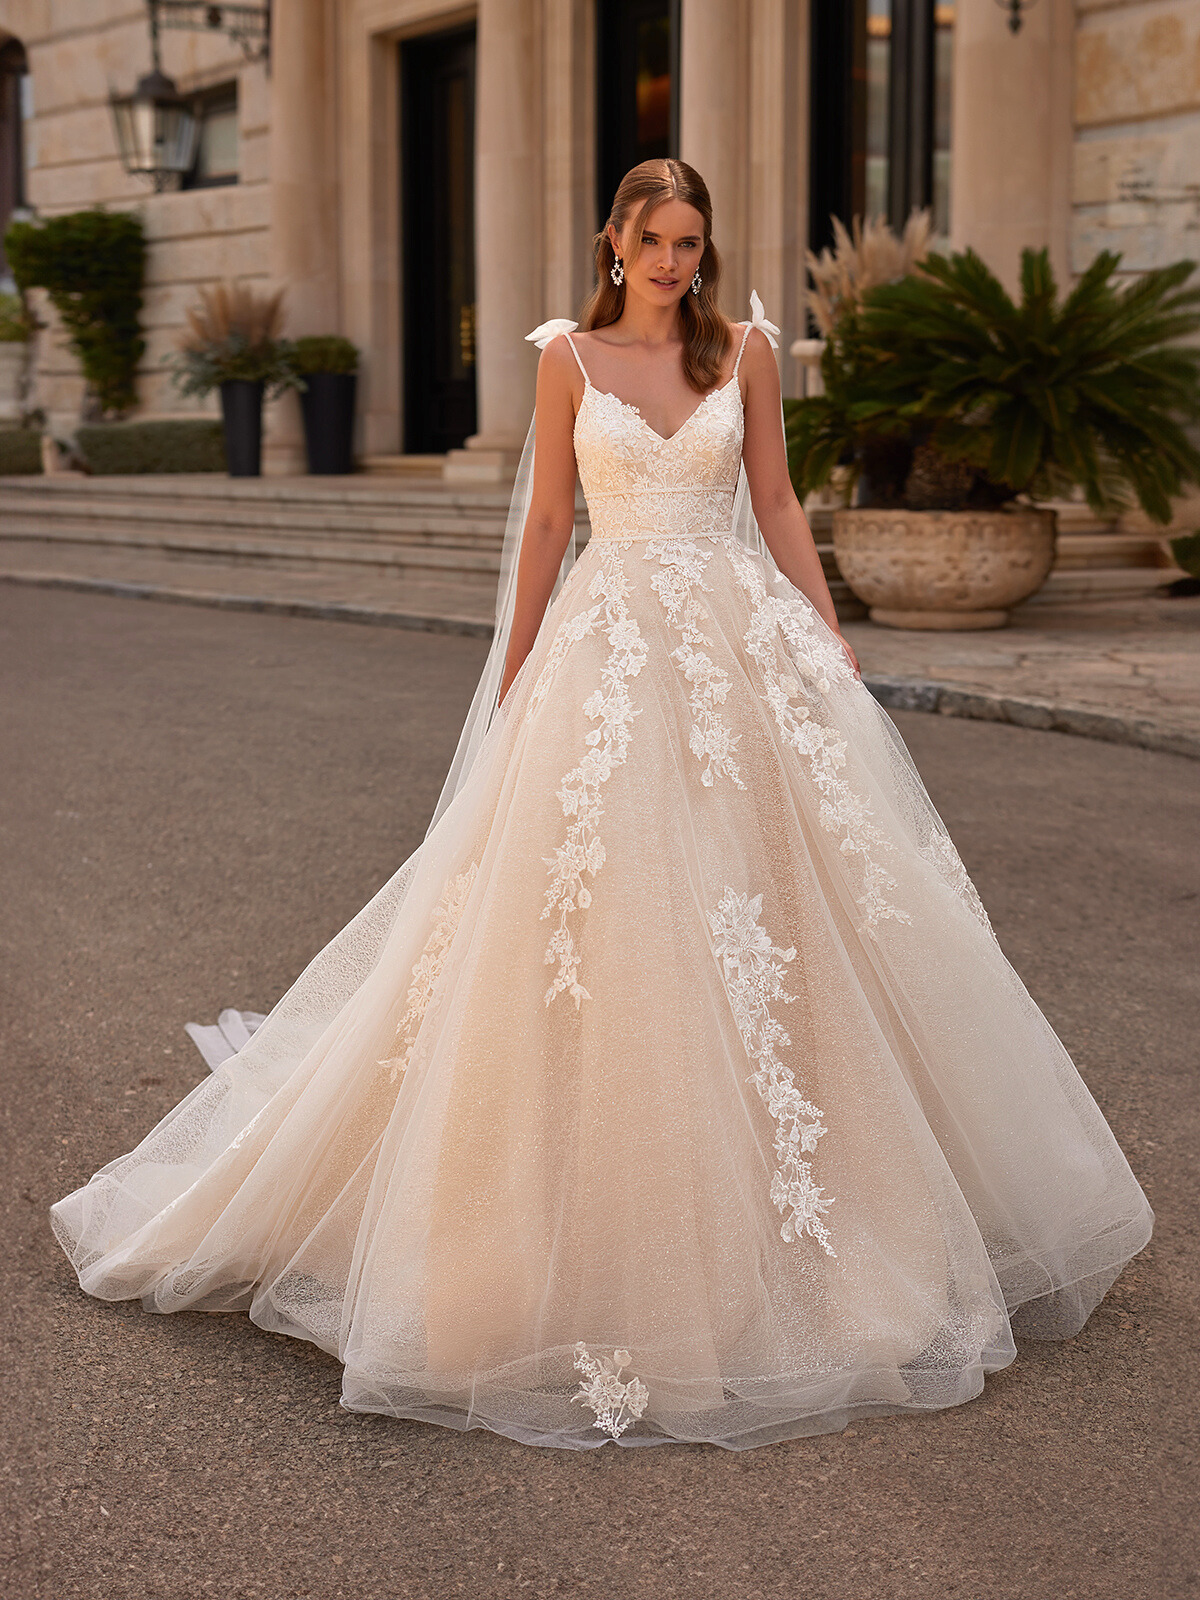 Full A-line Wedding Dress with Detachable Bows